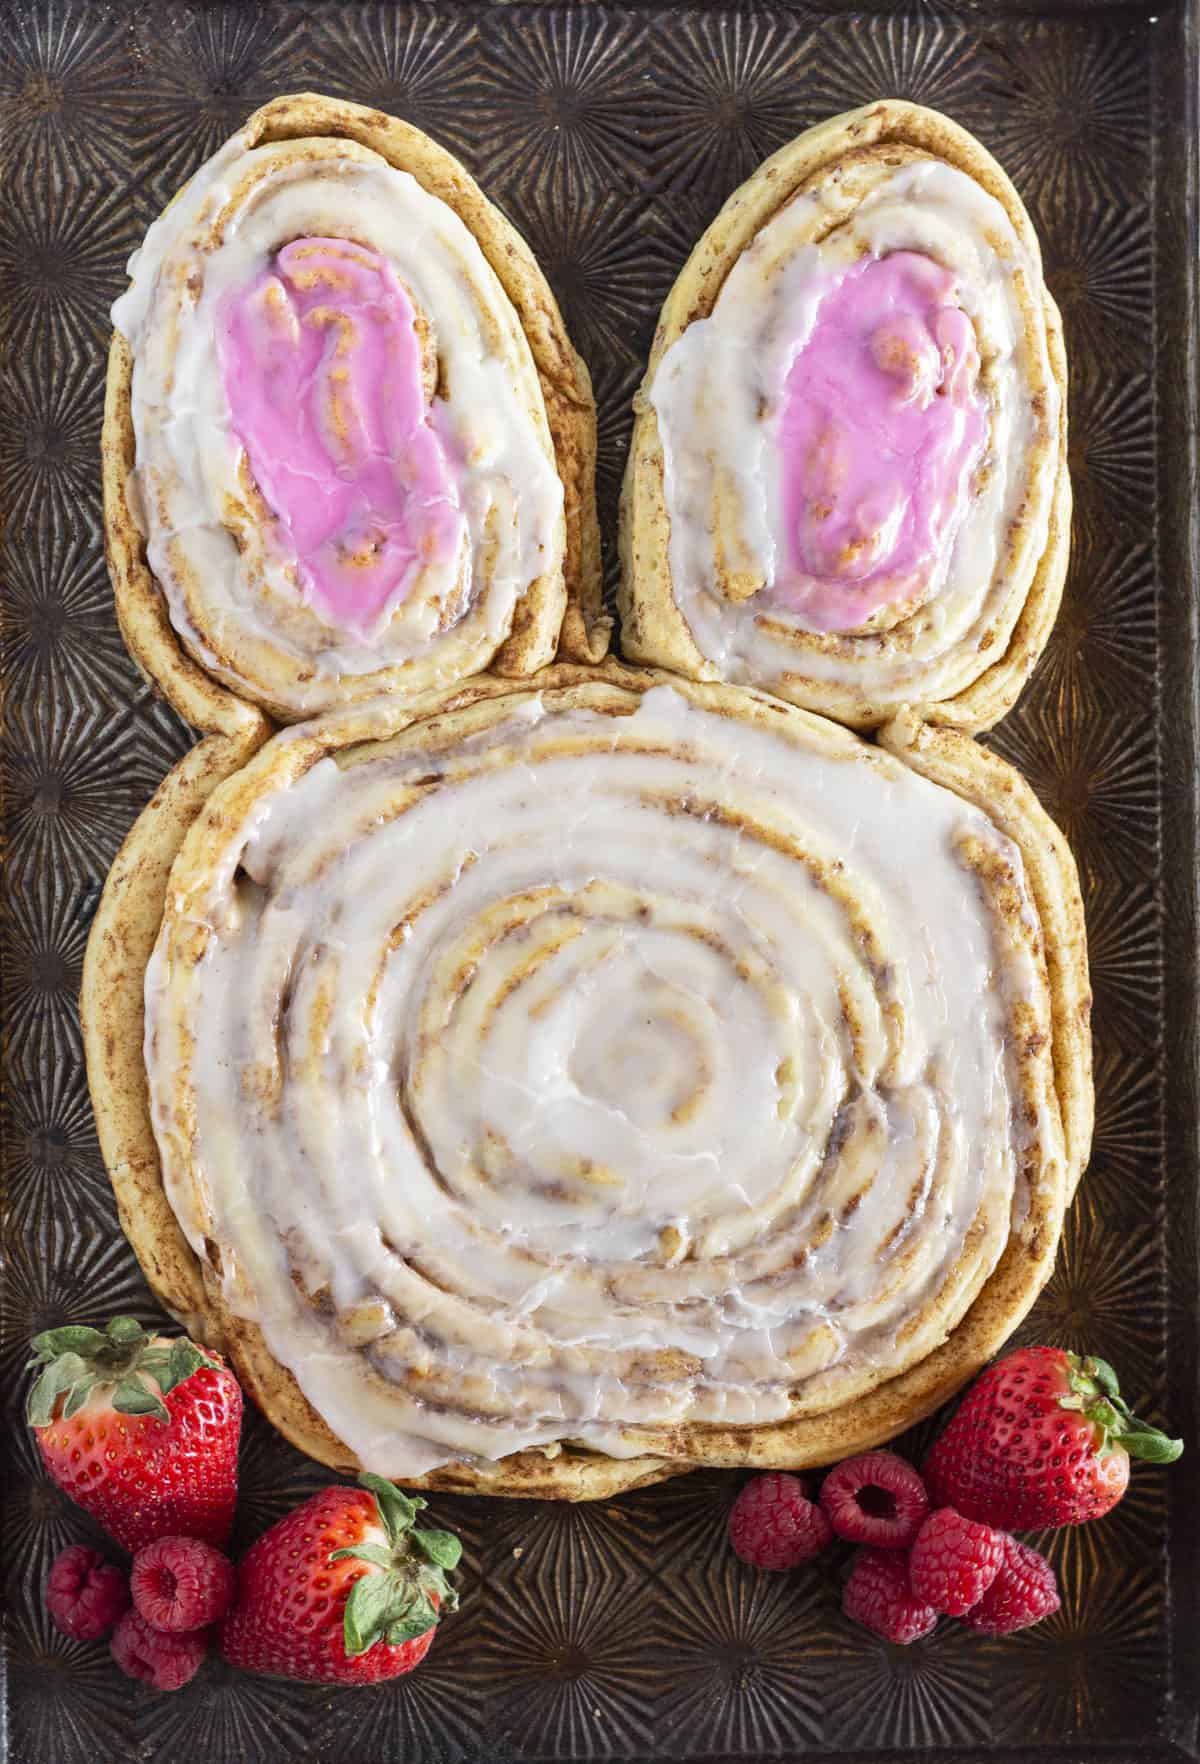 A giant bunny cinnamon roll made with refrigerated cinnamon rolls and served with strawberries and raspberries.